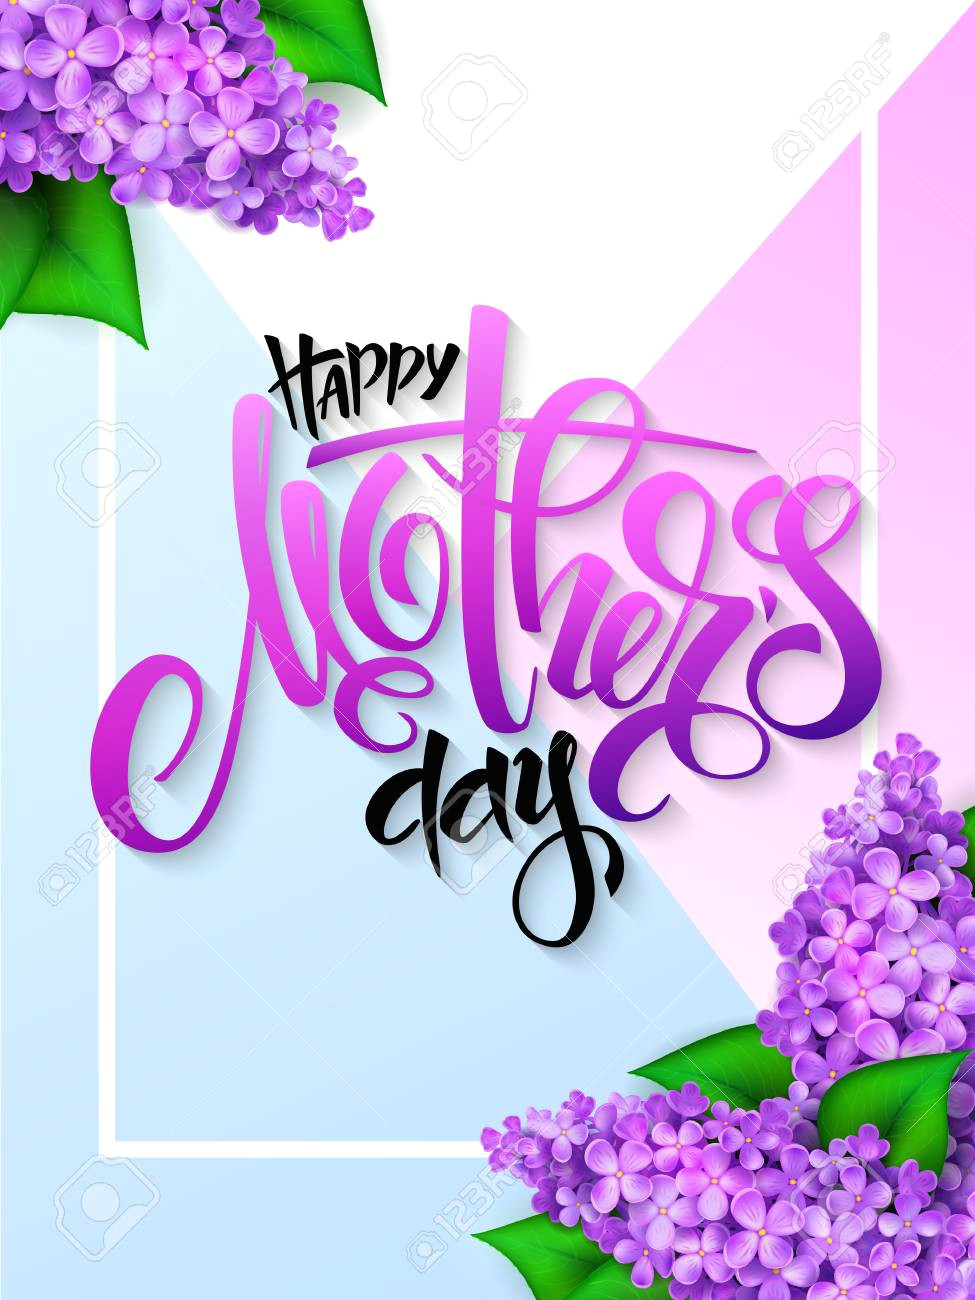 Drawings Of Flowers for Mother S Day Vector Hand Drawn Mothers Day Greeting Card with Blooming Lilac